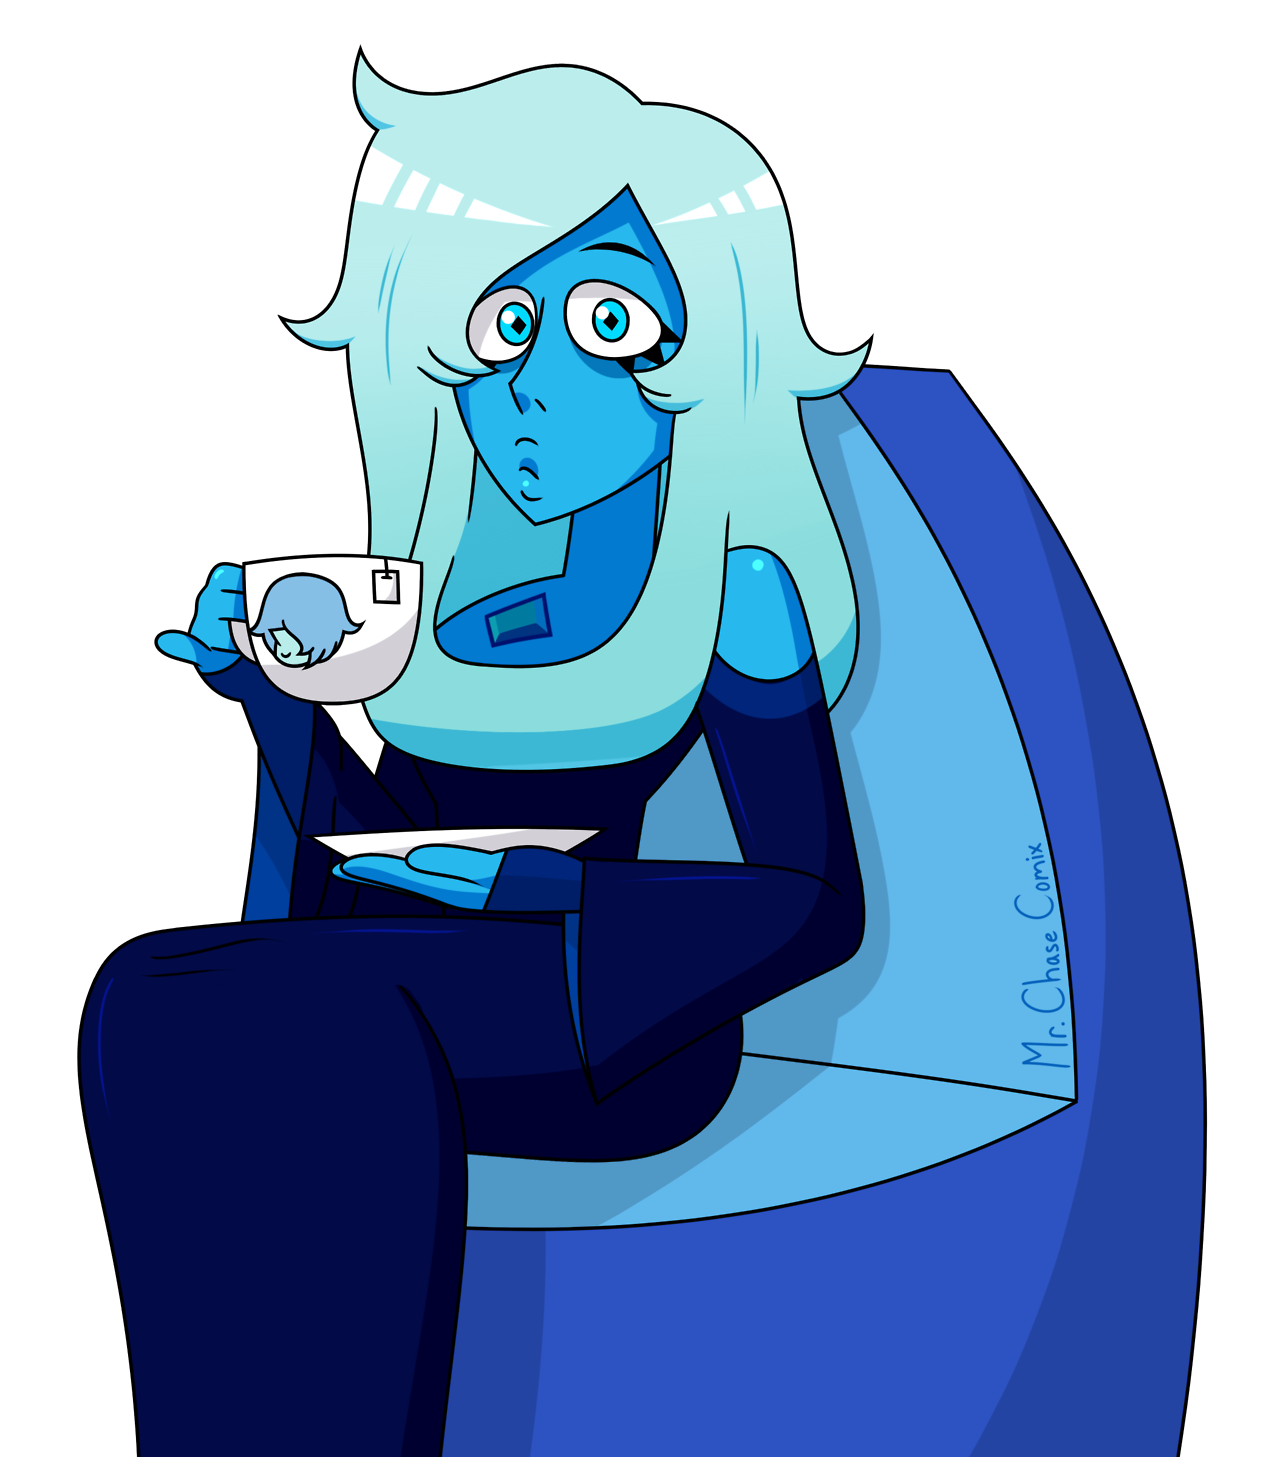 Morning Blue Diamond Remake I wanted to do a quick little redraw of an old drawing today. !Original!